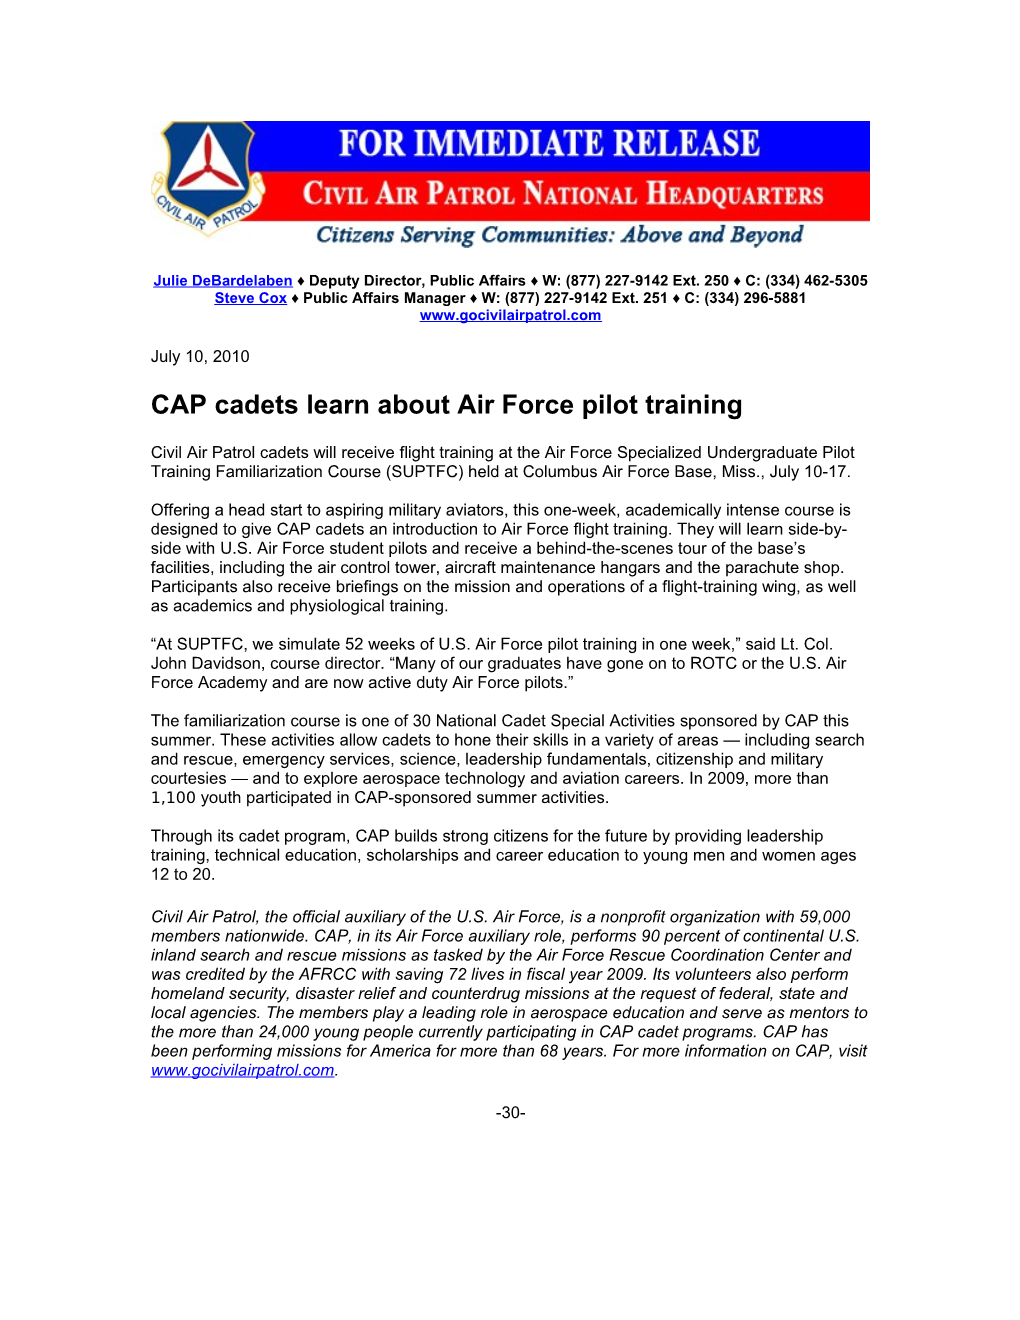 CAP Cadets Learn About Air Force Pilot Training